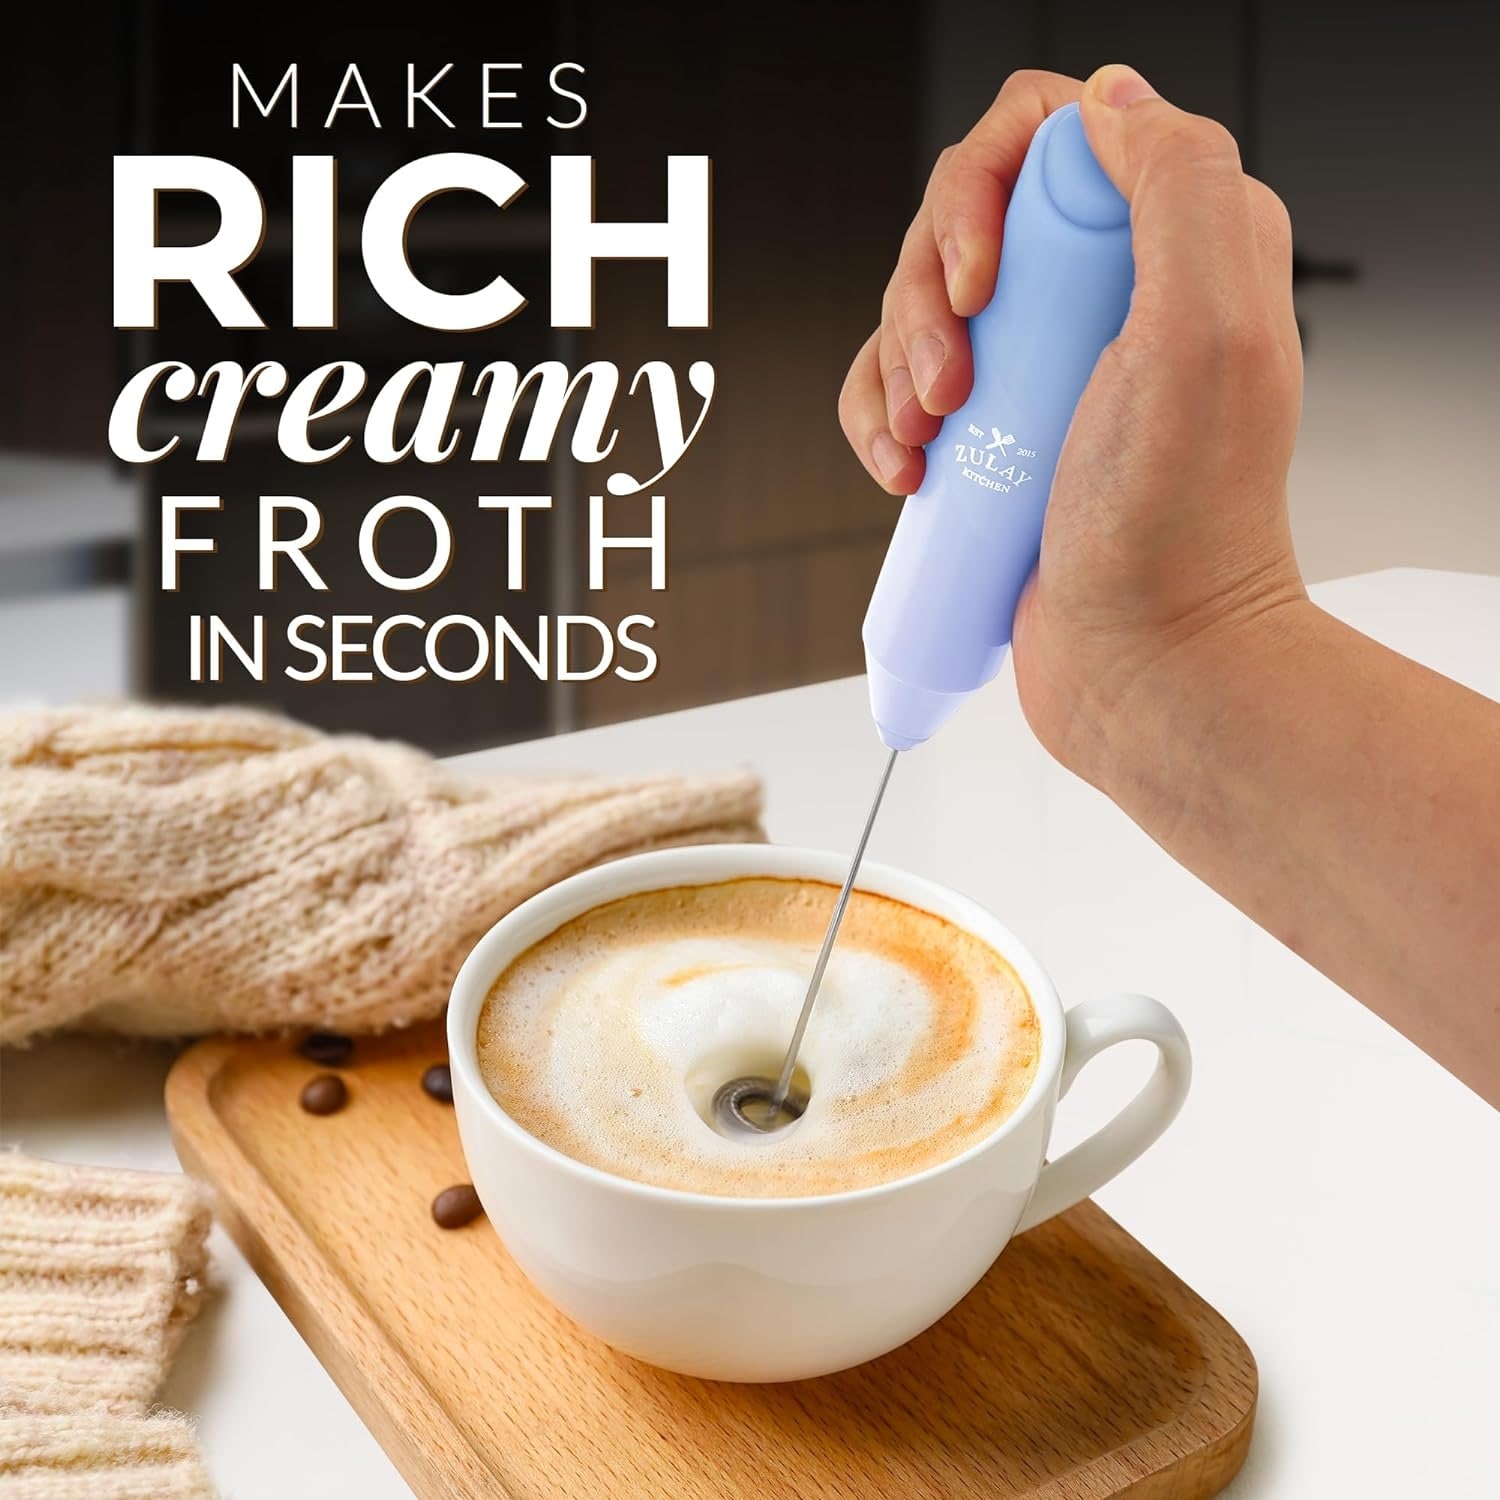 https://ak1.ostkcdn.com/images/products/is/images/direct/fea4762c90b904fb952399e10b59b45a3da2dfb2/FrothMate-Powerful-Milk-Frother-for-Coffee.jpg